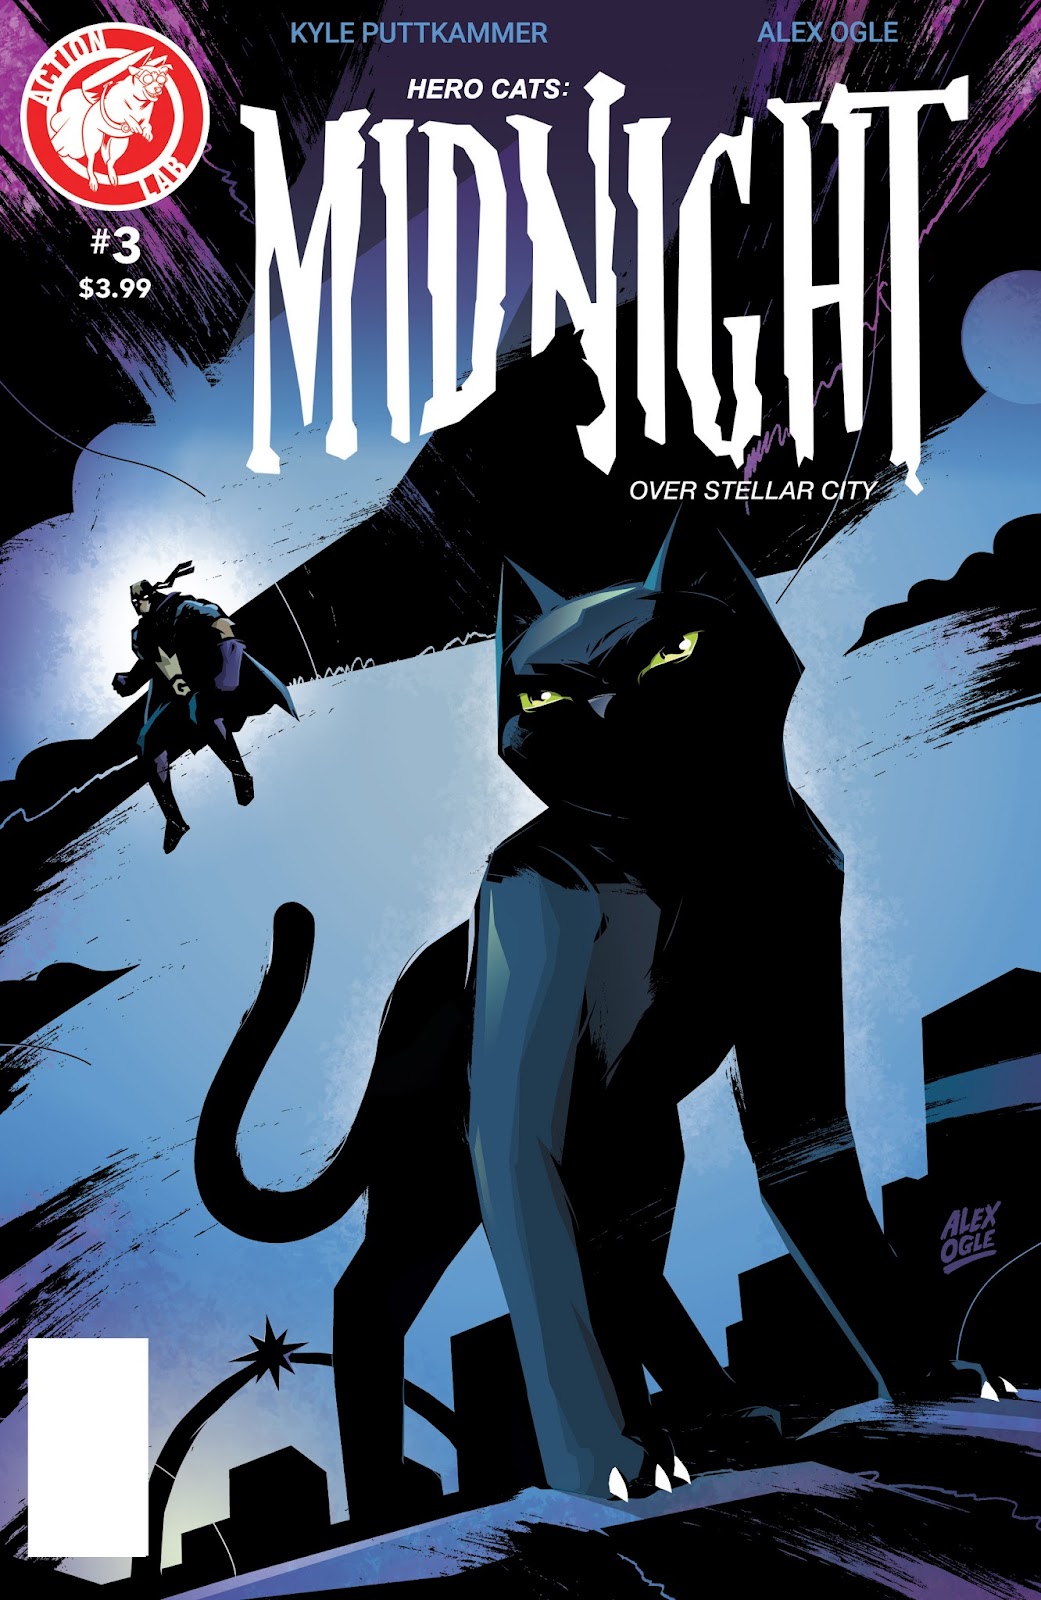 Hero Cats: Midnight Over Stellar City Vol. 2 issue 3 - Page 1